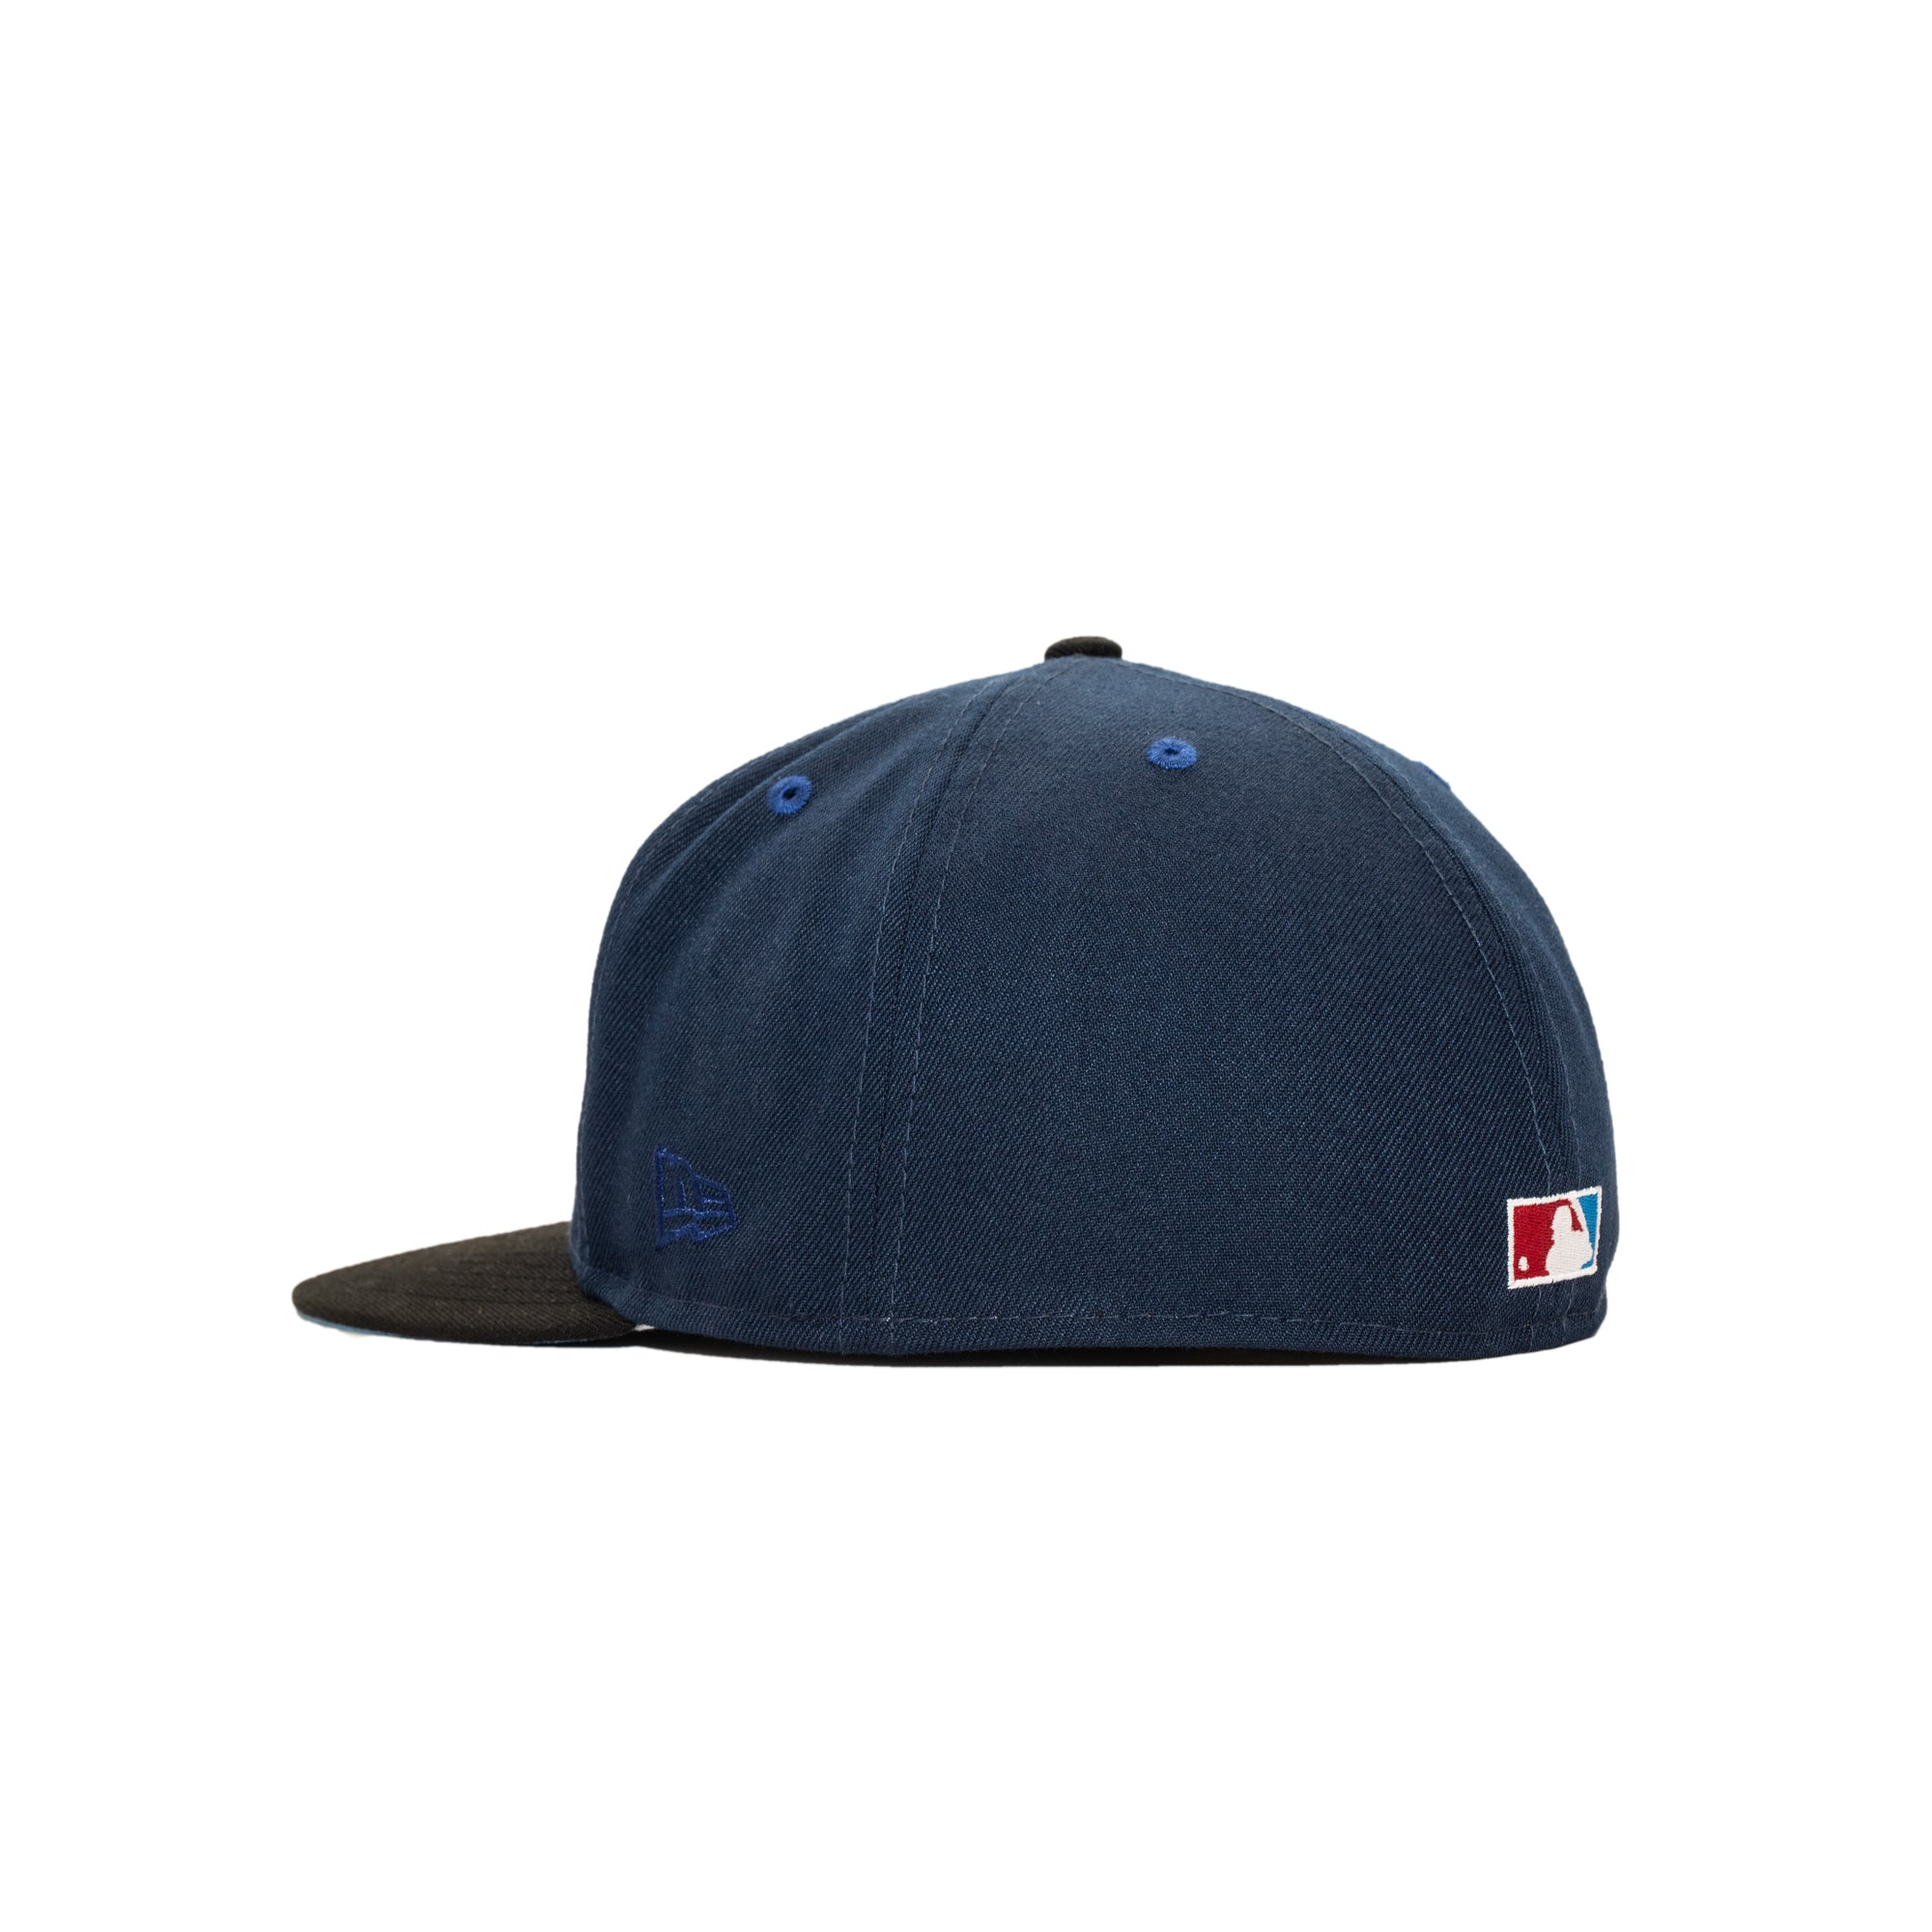 New Era x Renarts 59FIFTY New York Yankees 'Juice' Fitted Hat